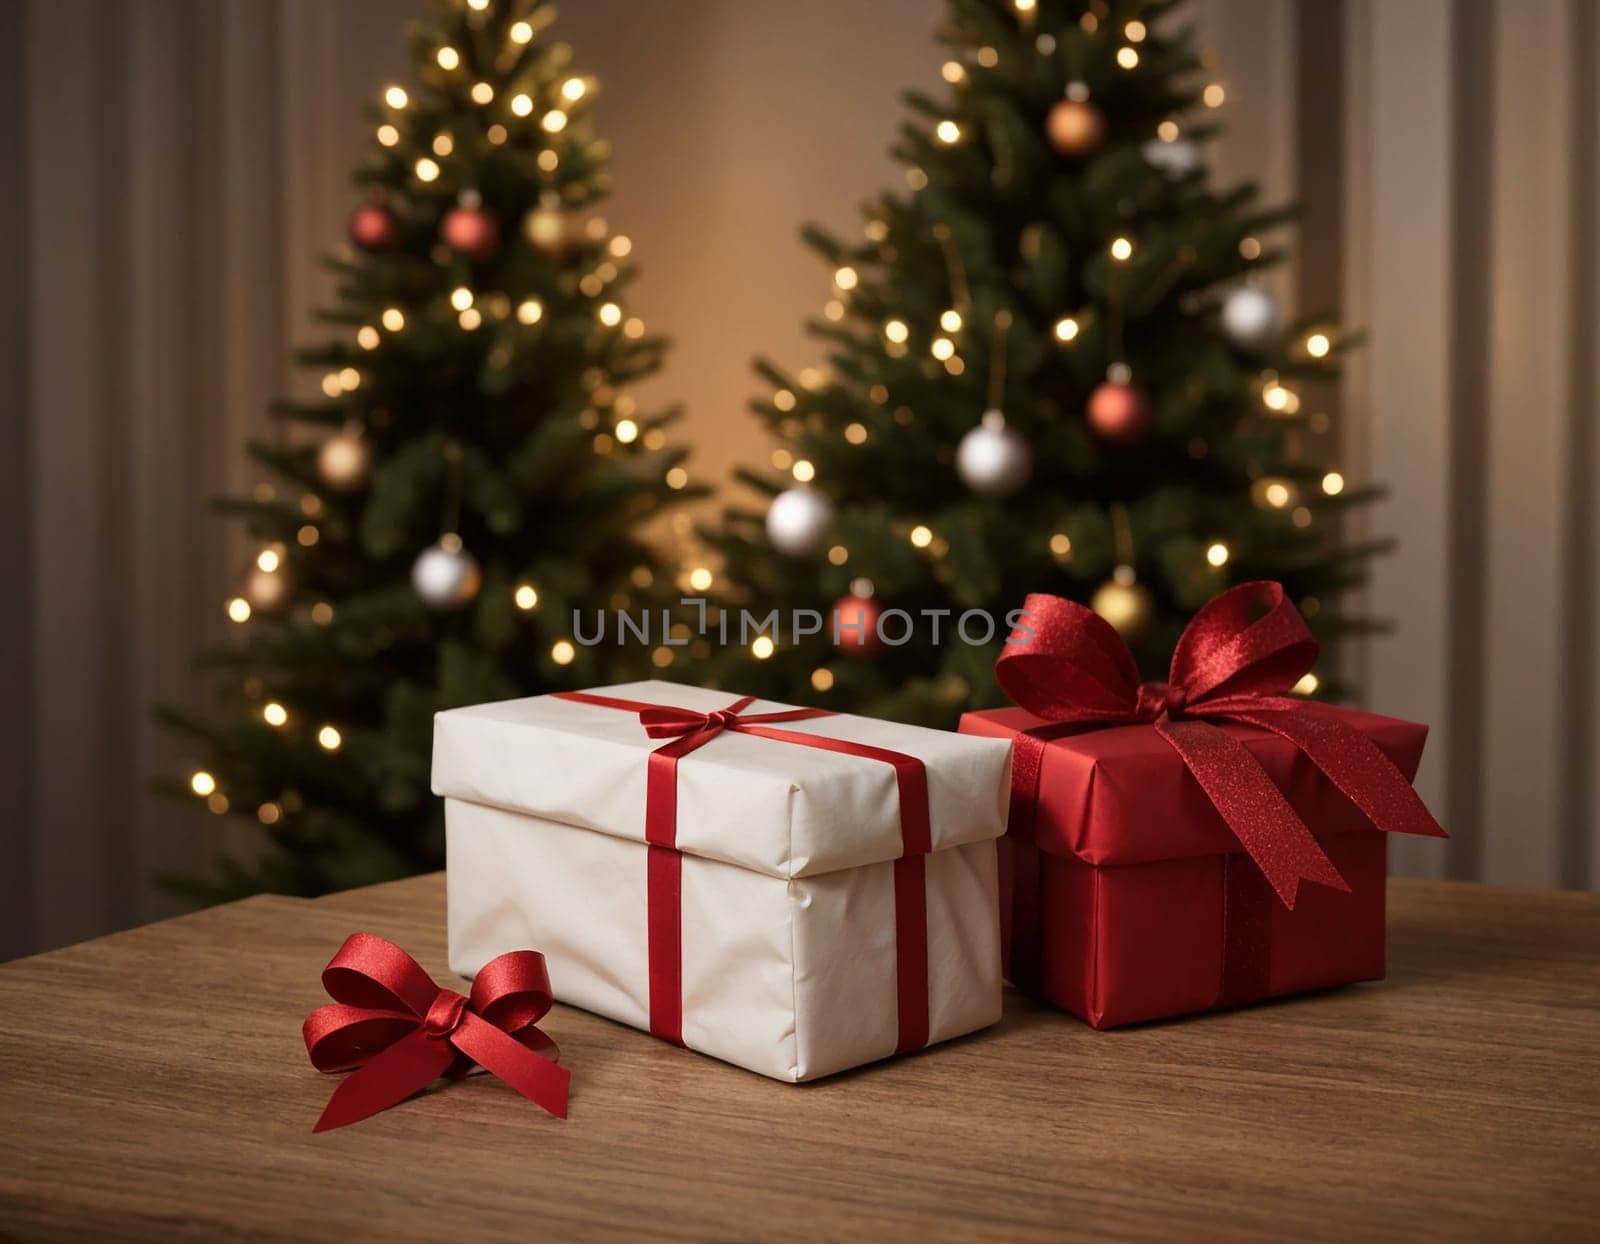 Lovely Christmas background with gifts, decorations and candles on the table